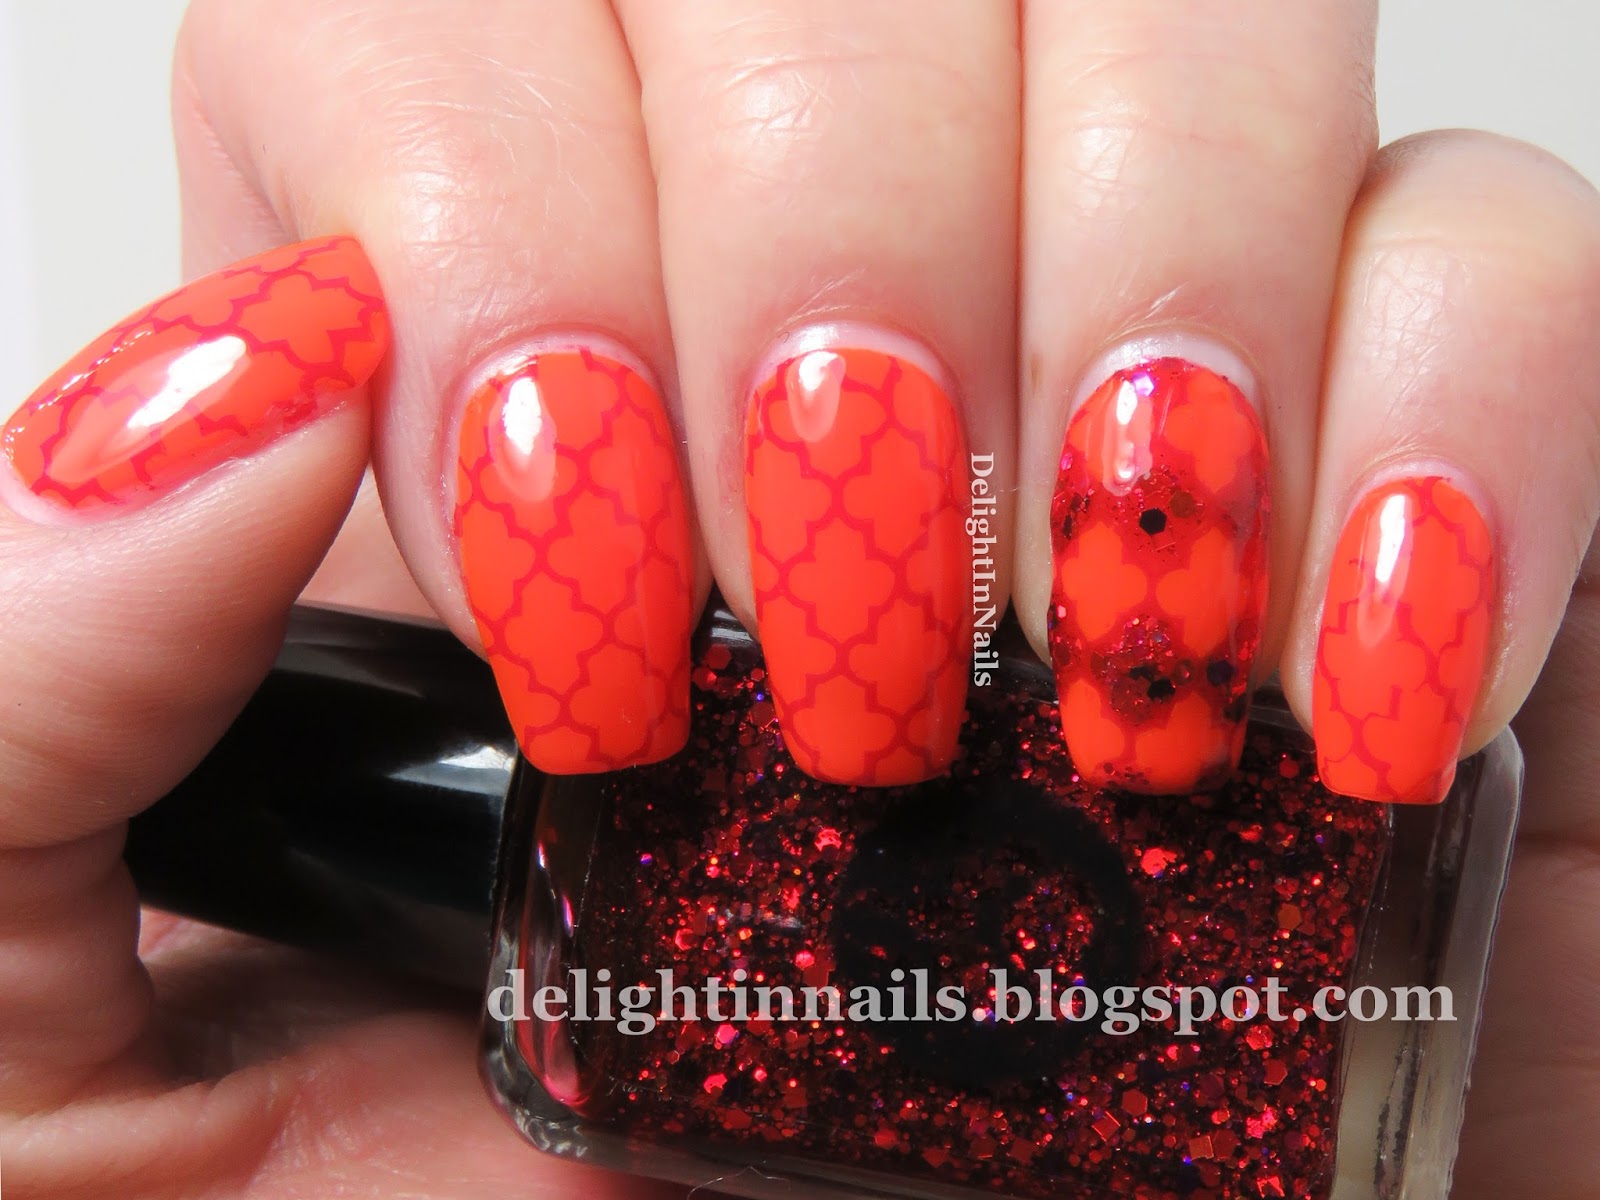 Delight In Nails: 40 Great Nail Art Ideas - 3 Shades of Red/Orange